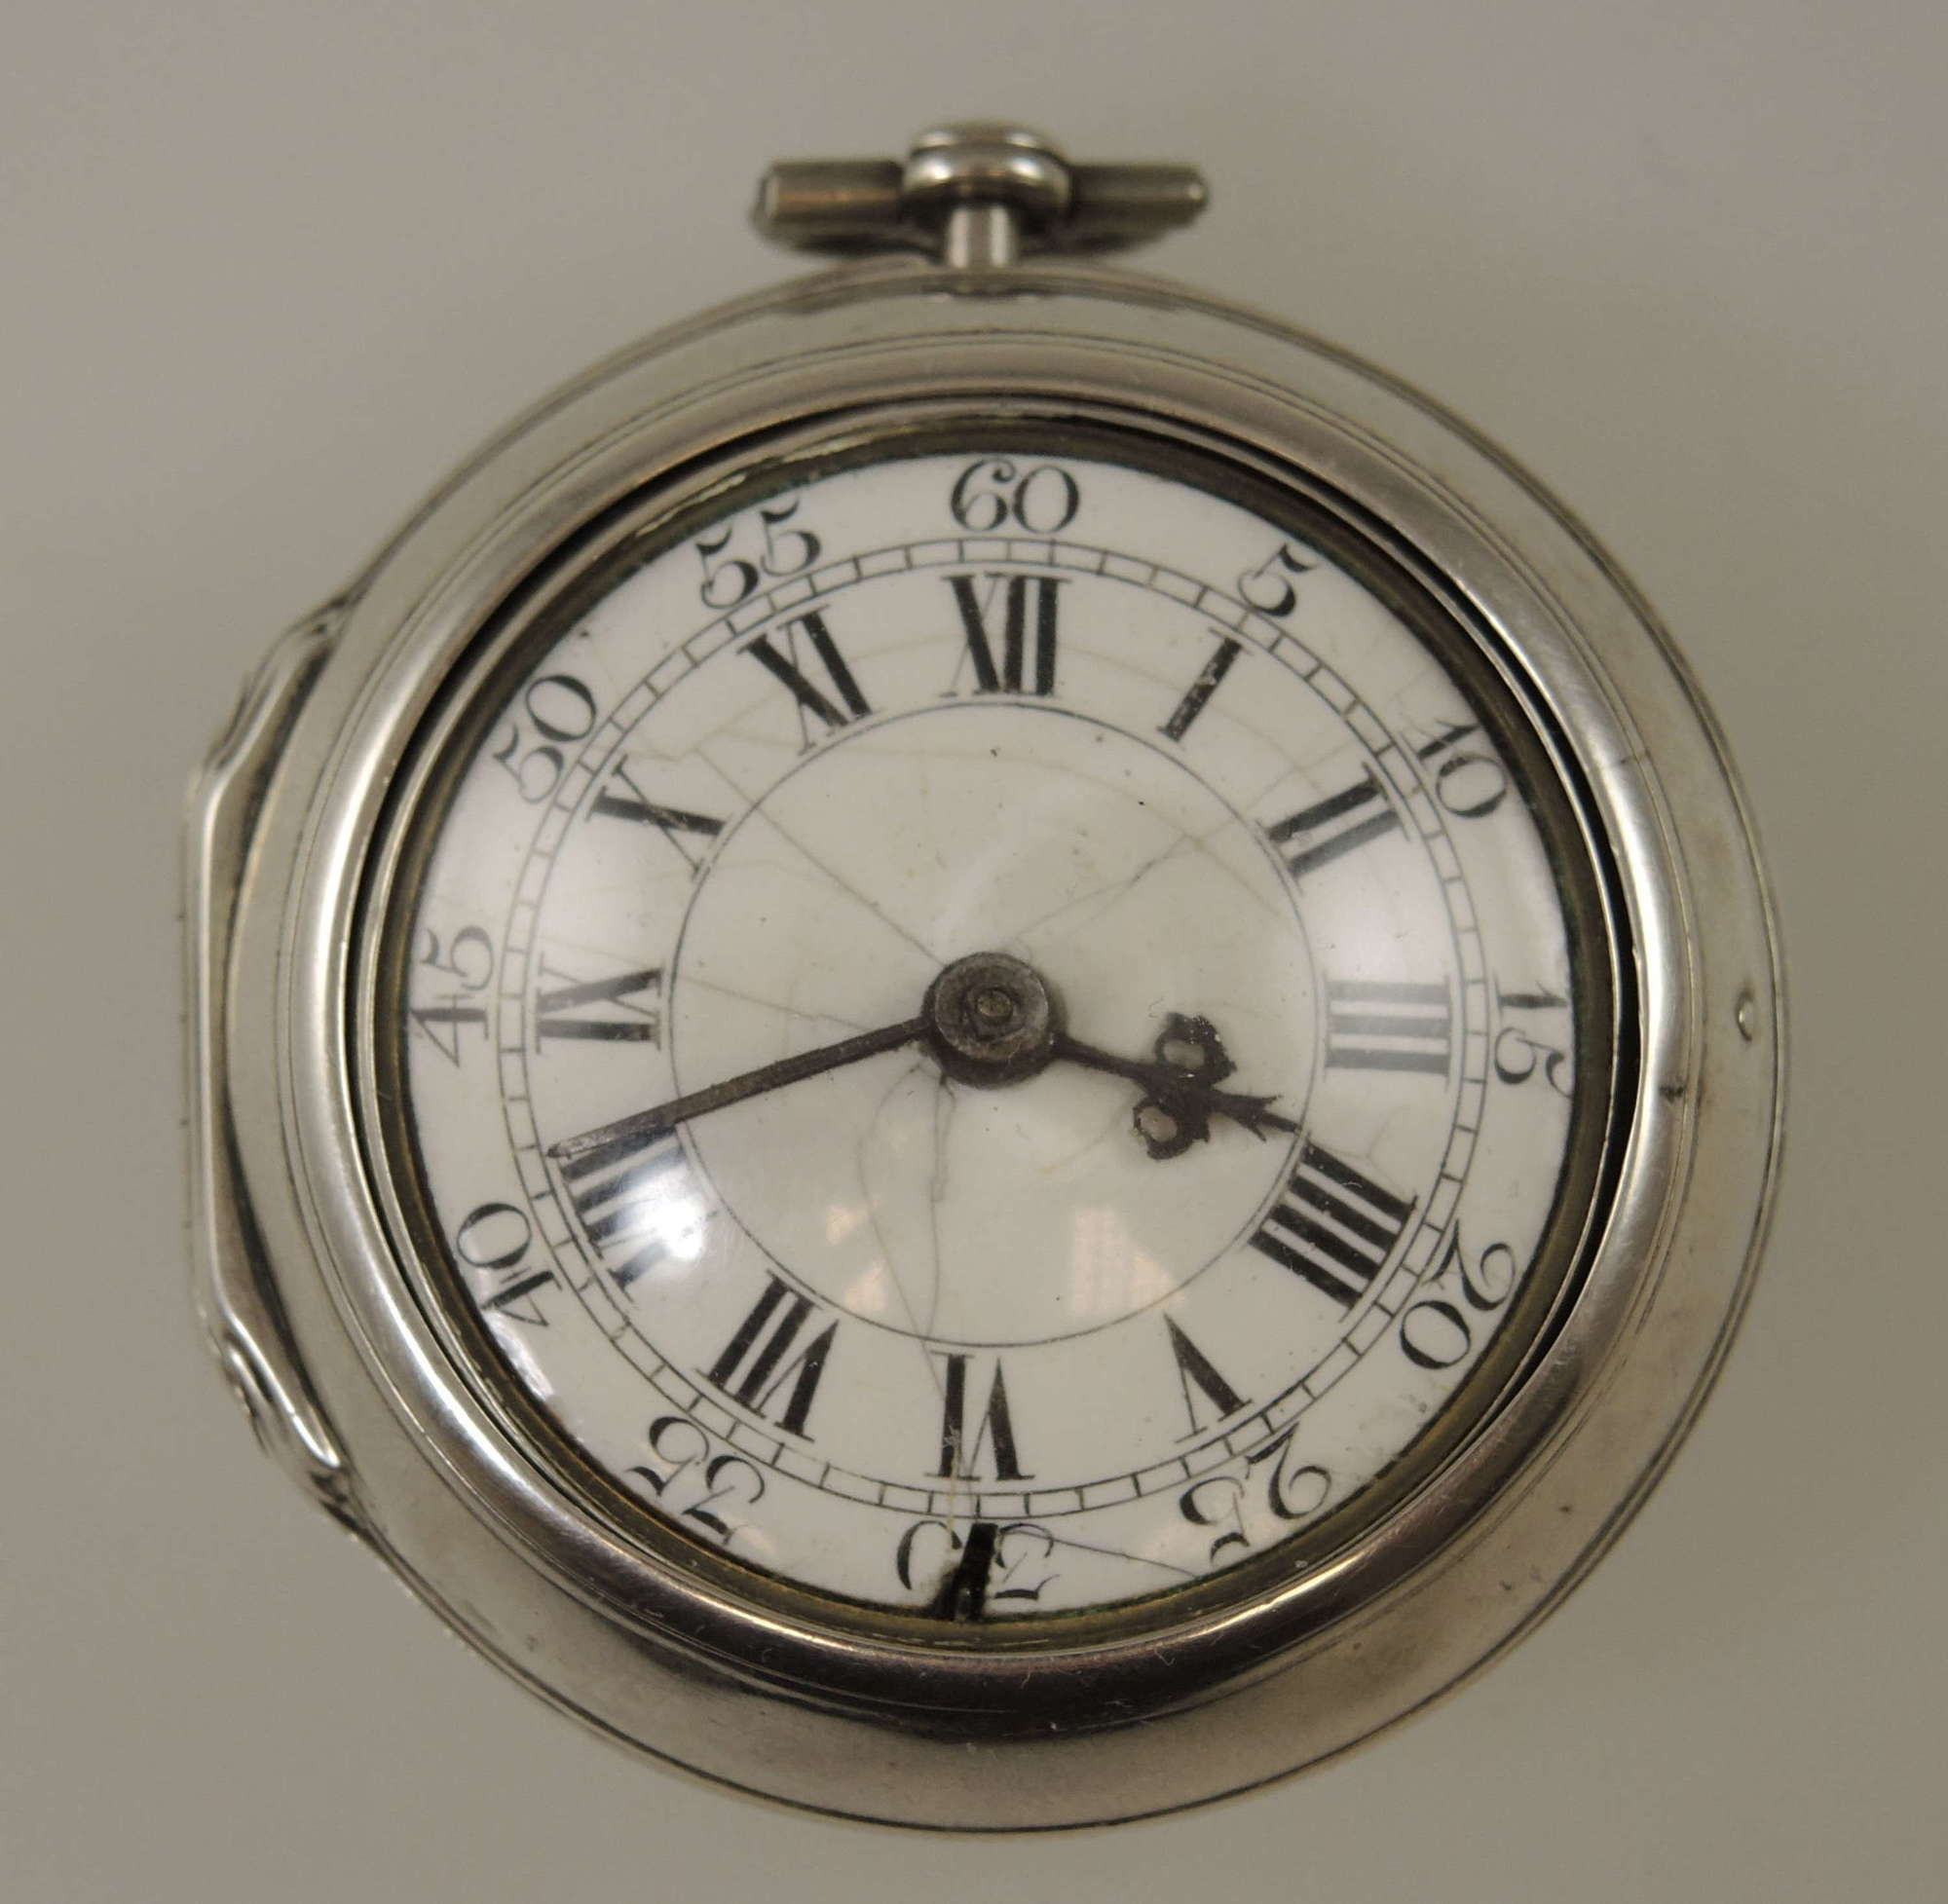 English silver pair cased Verge pocket watch by P Moore, London c1740